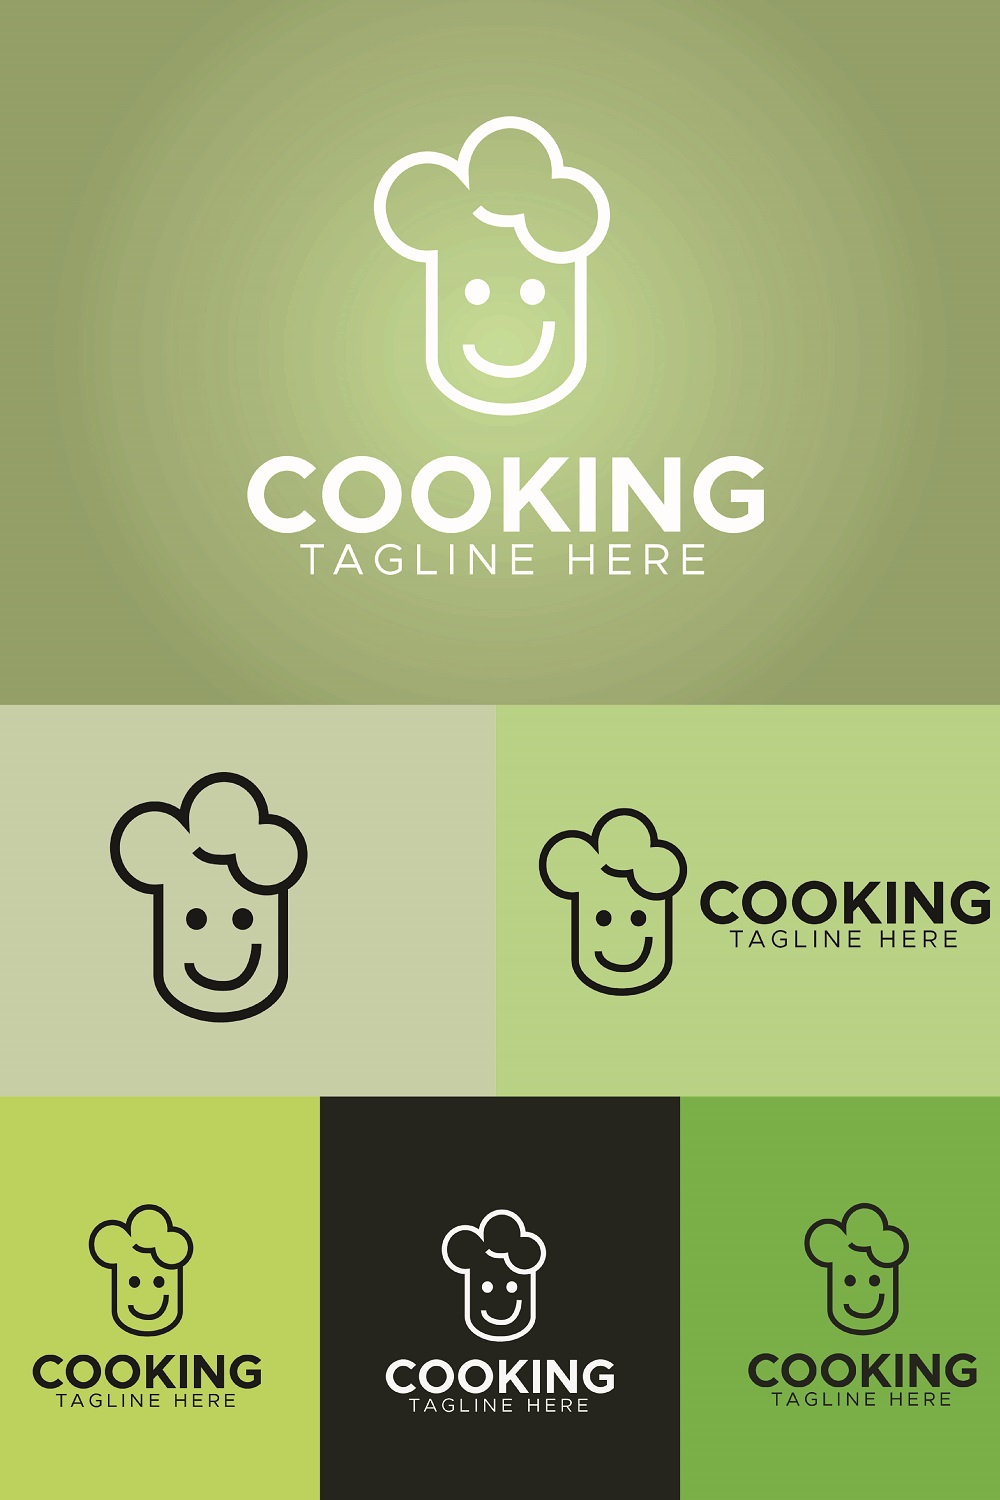 Chief - Cooking Logo main cover.